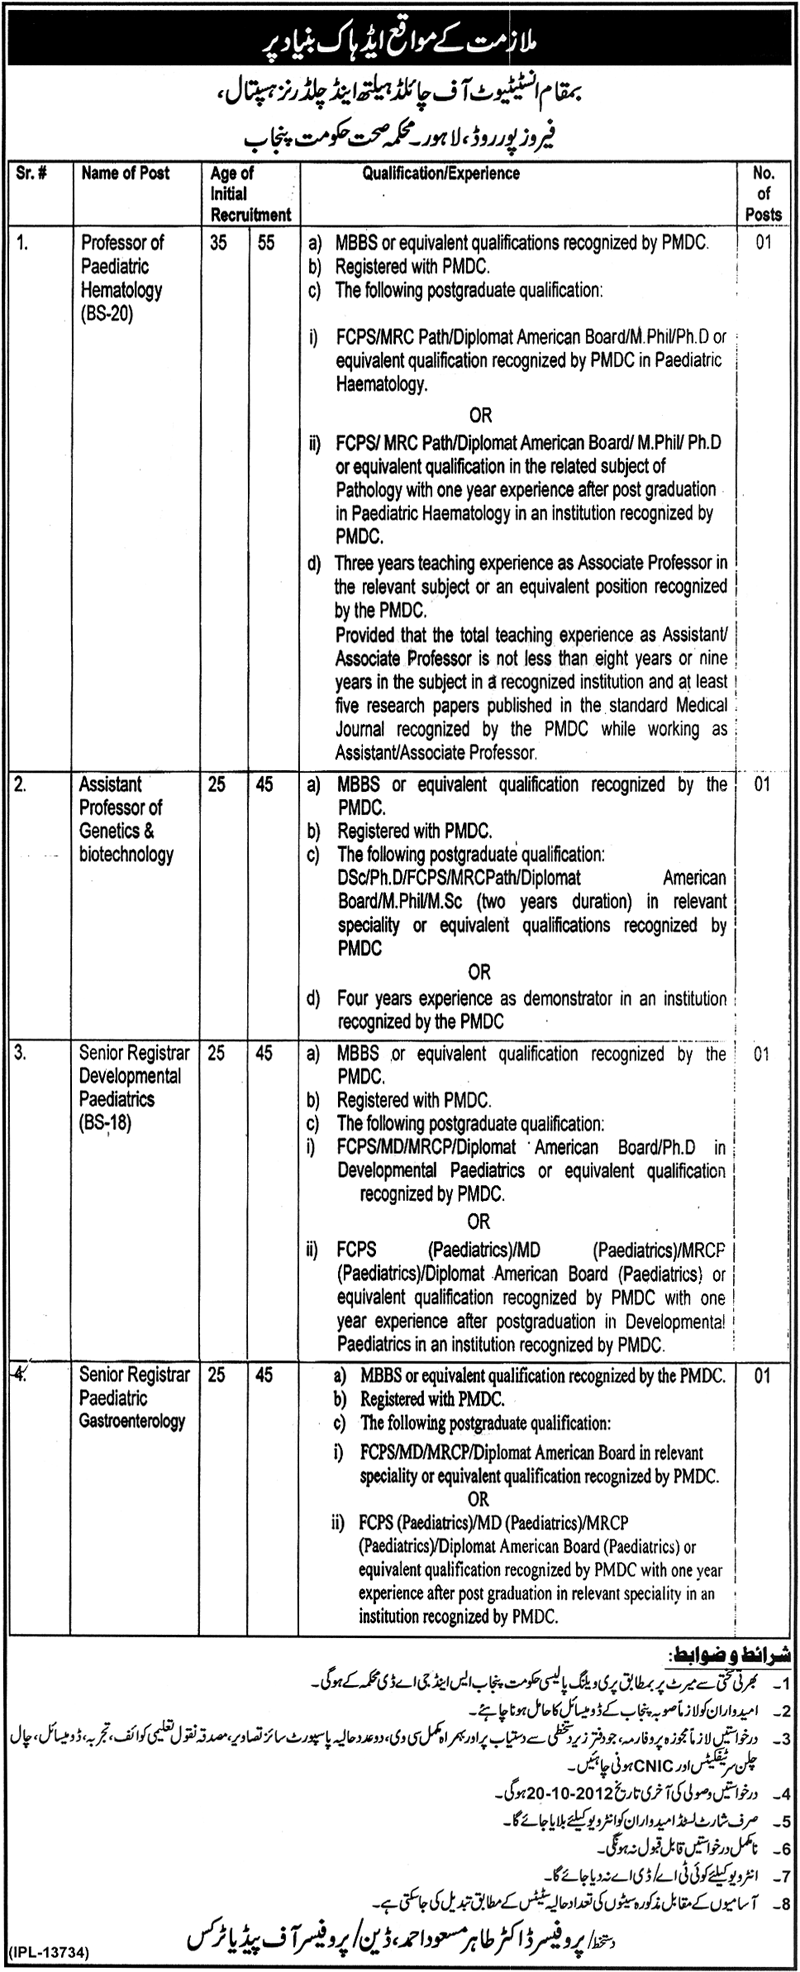 Institute of Child Health and Childern's Hospital, Ferozepur Road, Lahore, Ministry of Health, Government of Punjab Jobs